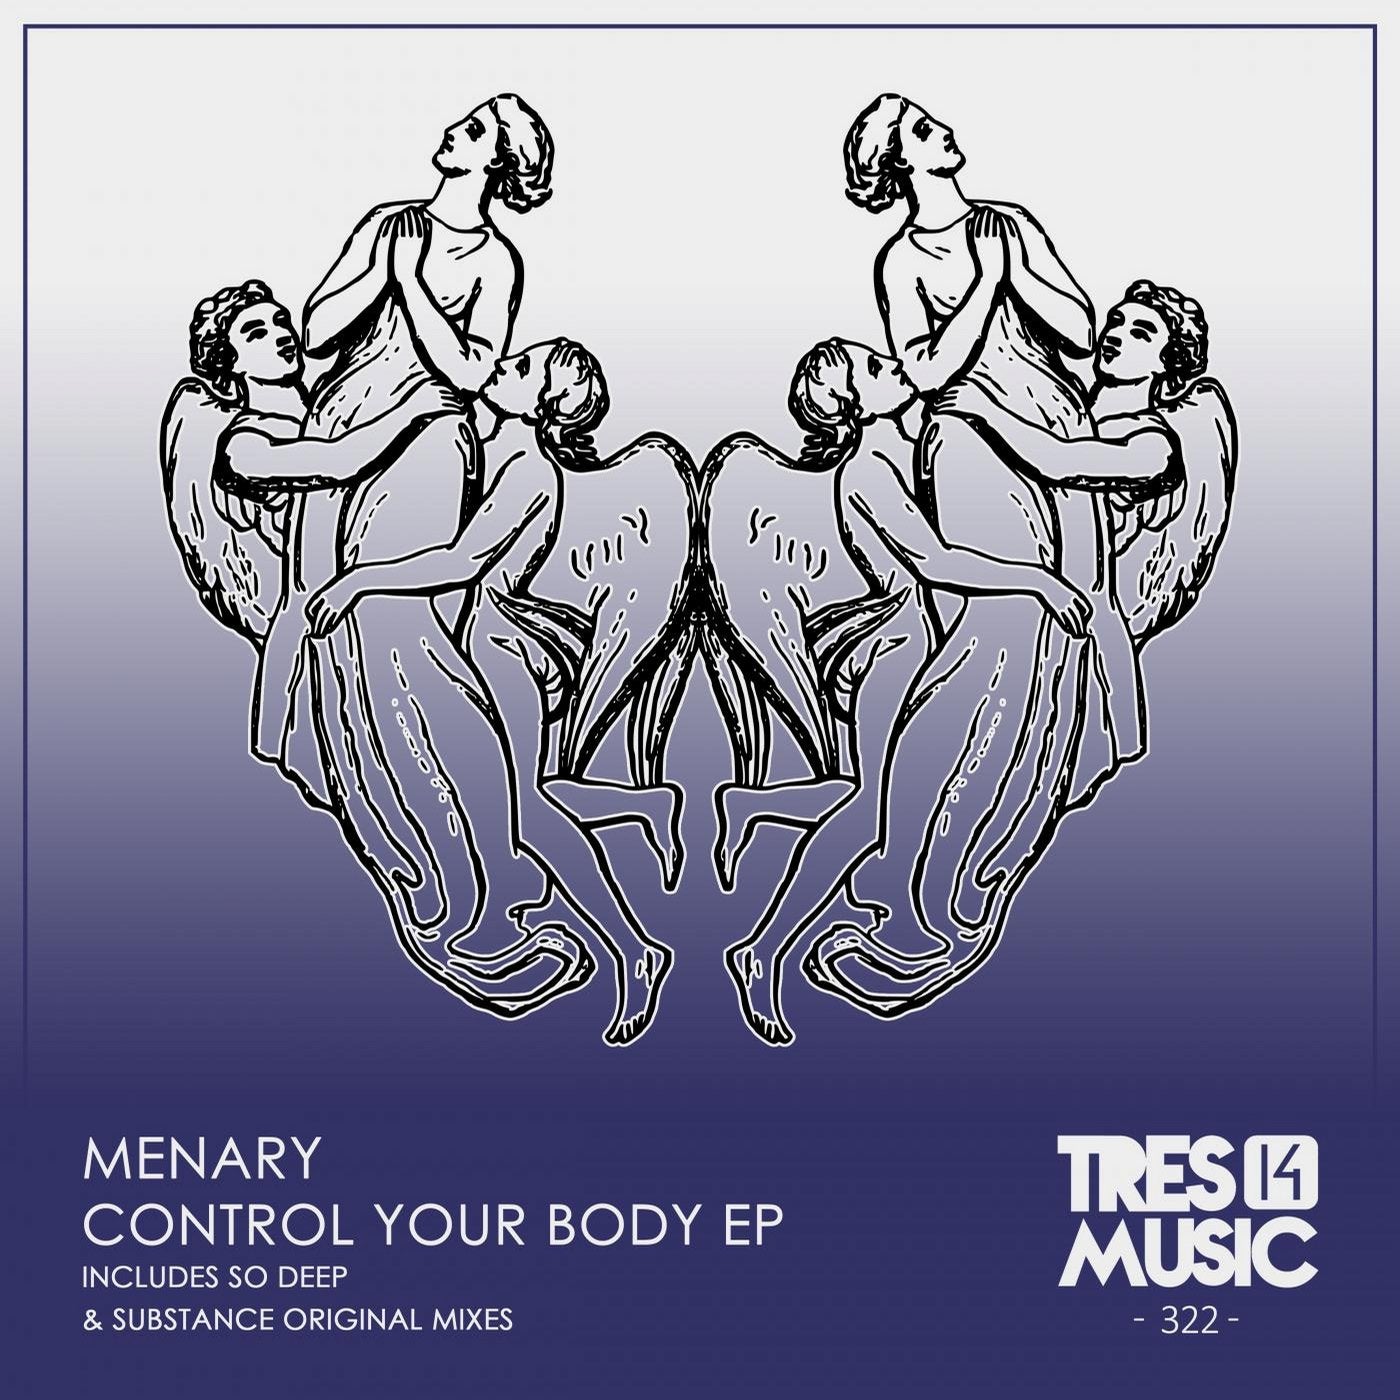 CONTROL YOUR BODY EP